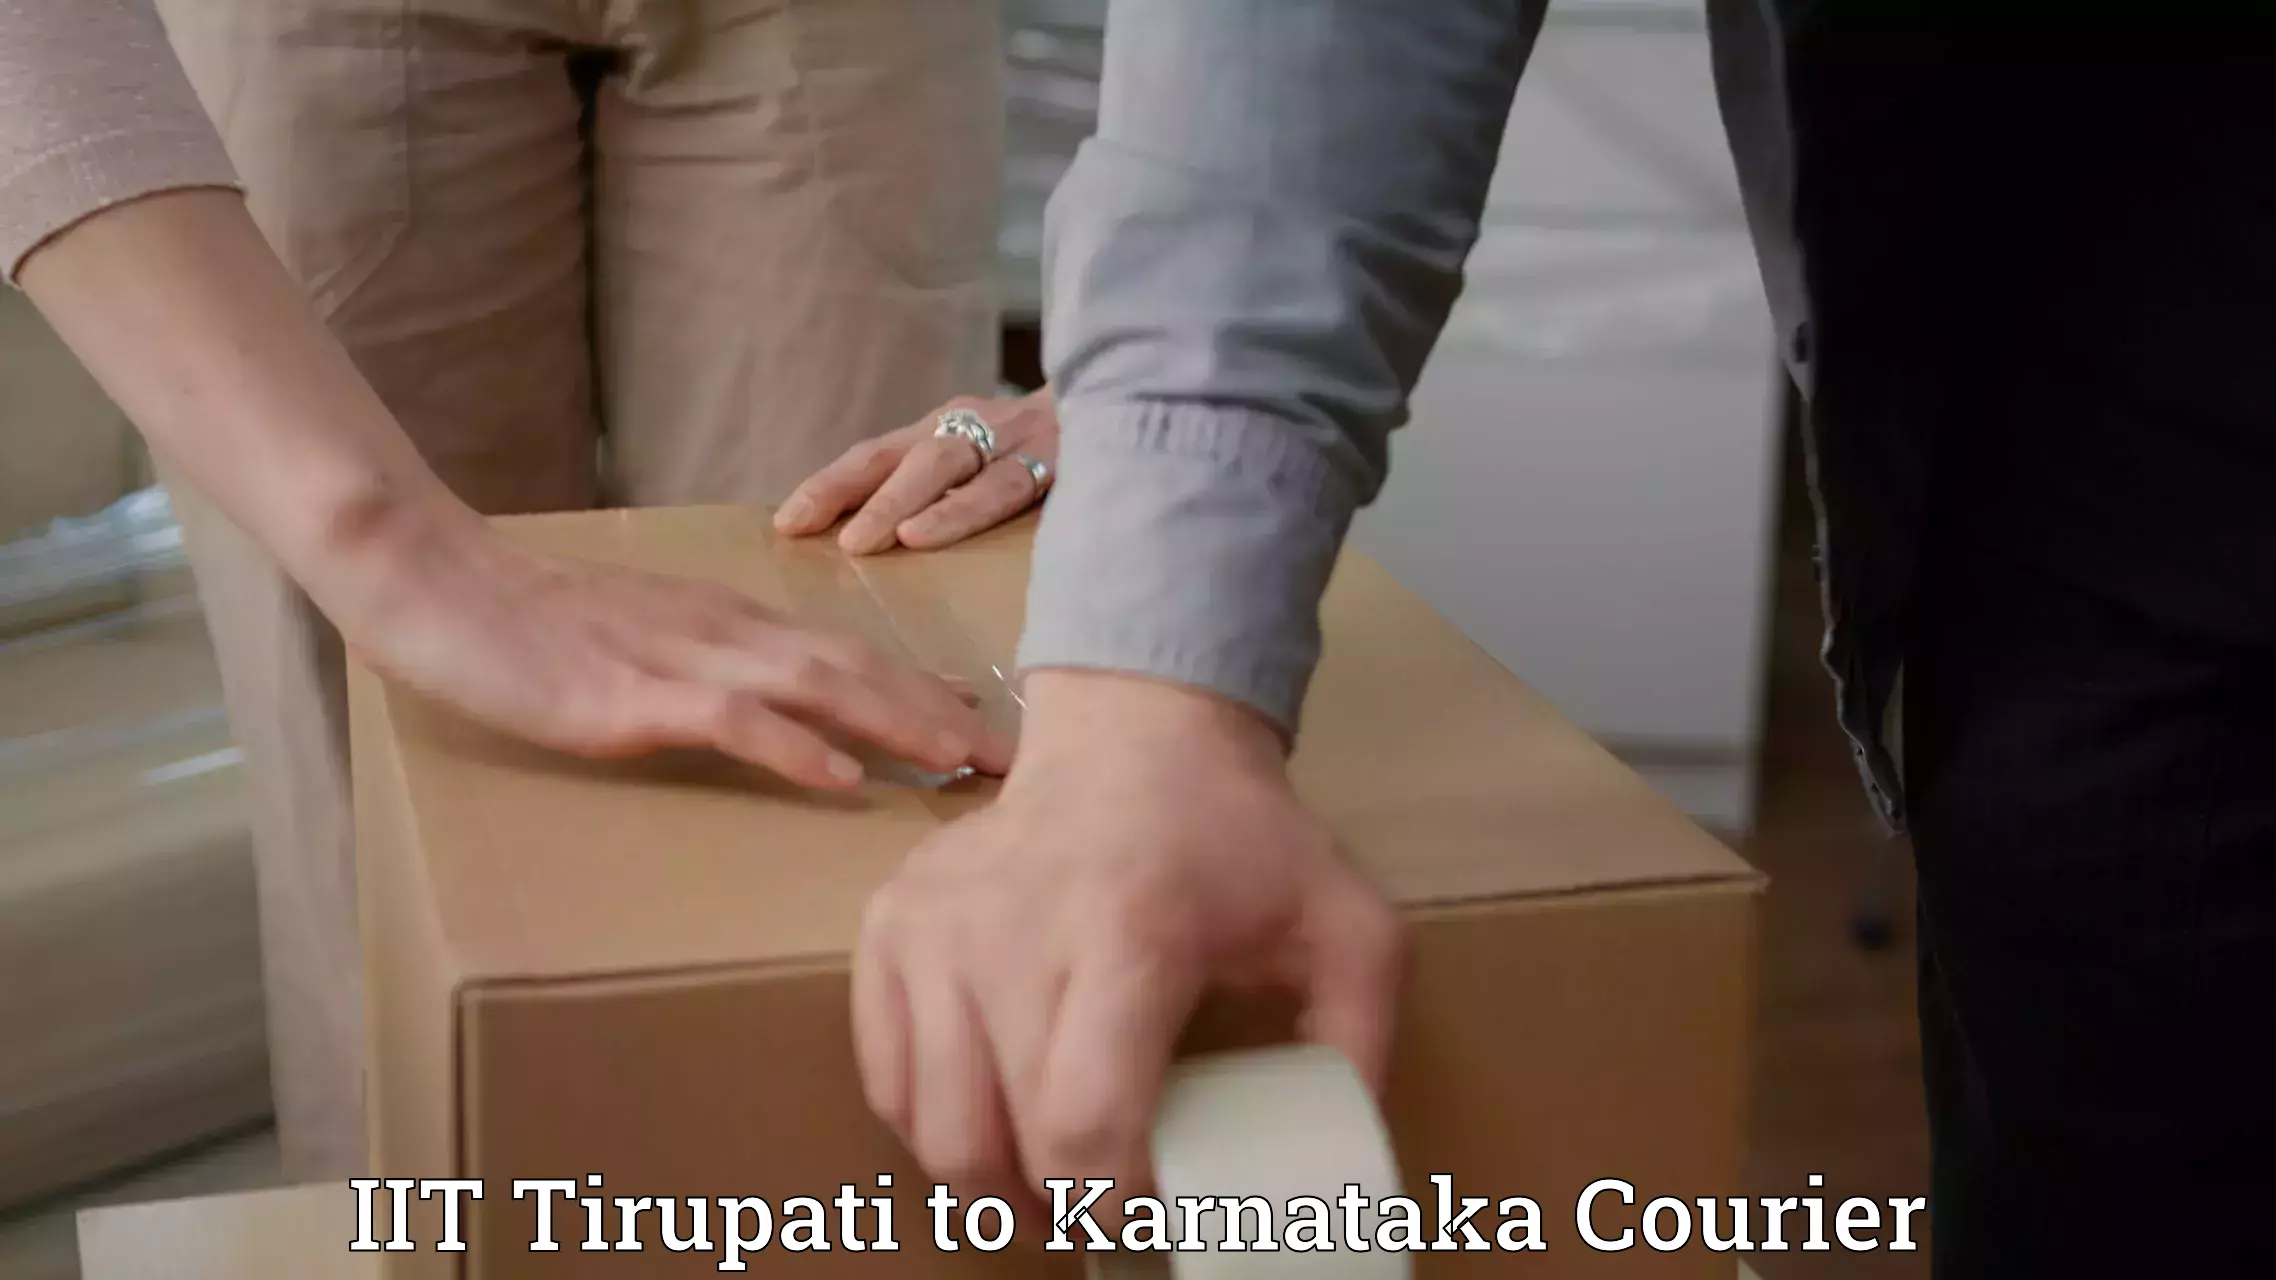 Reliable courier service IIT Tirupati to Siruguppa